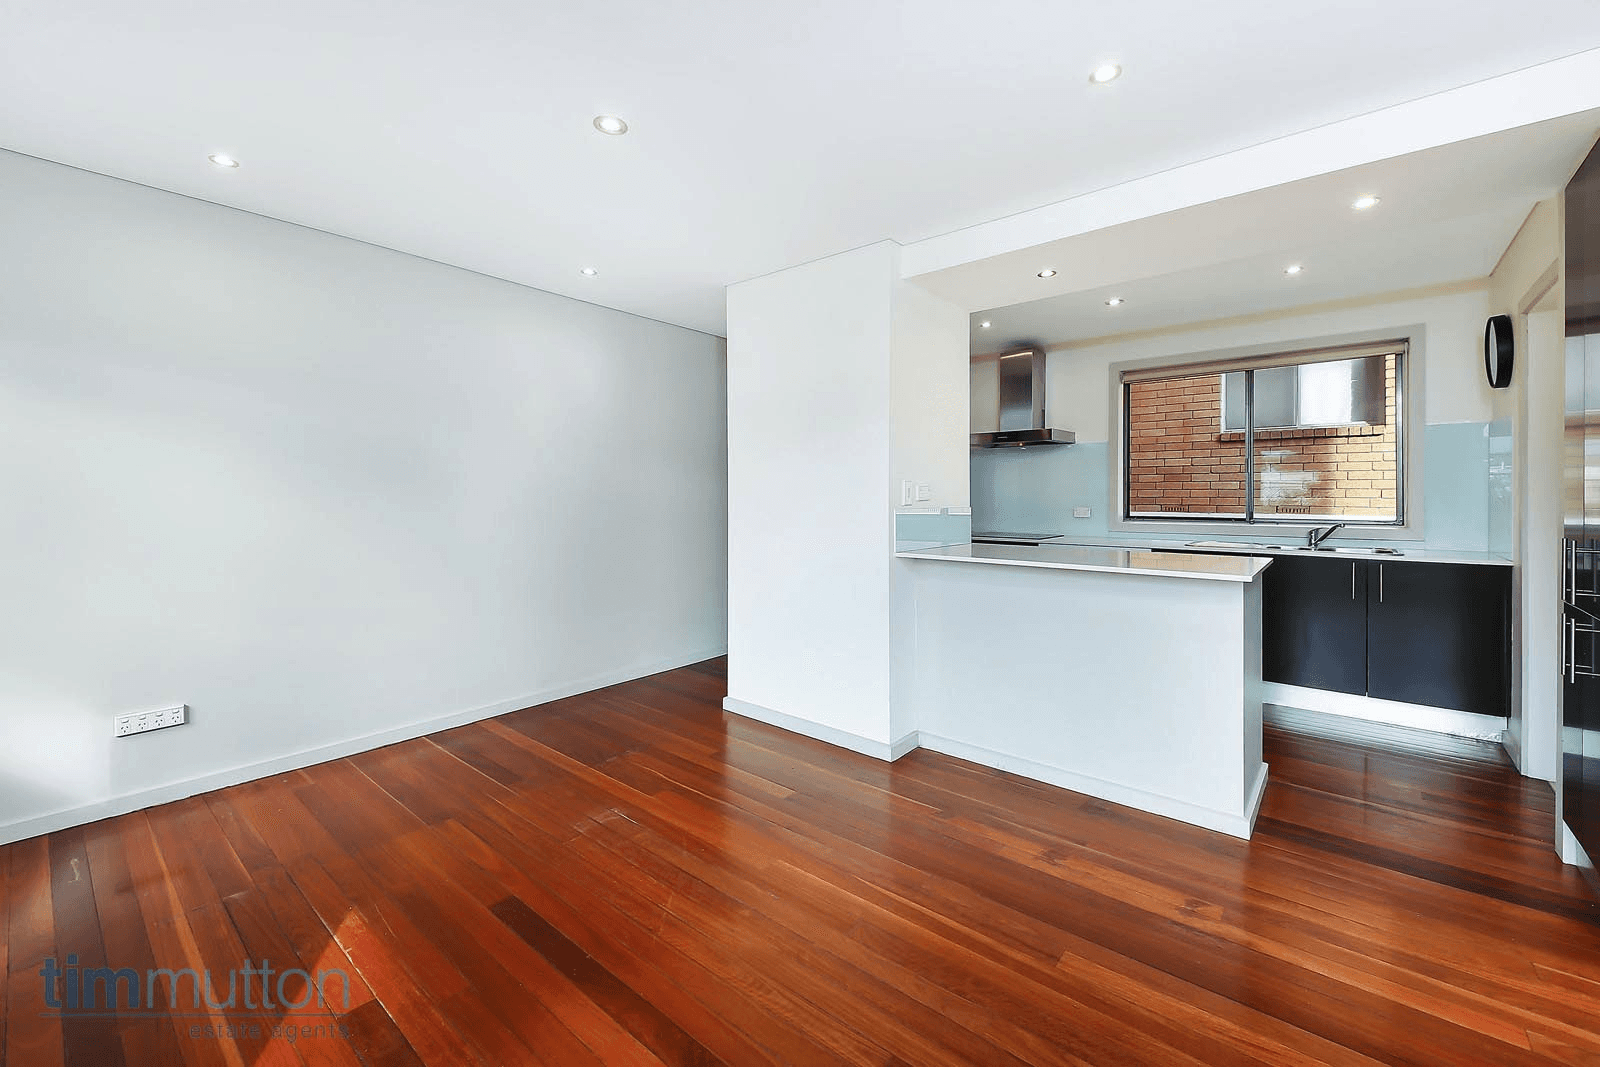 Unit 17/64 Sproule St, Lakemba, NSW 2195